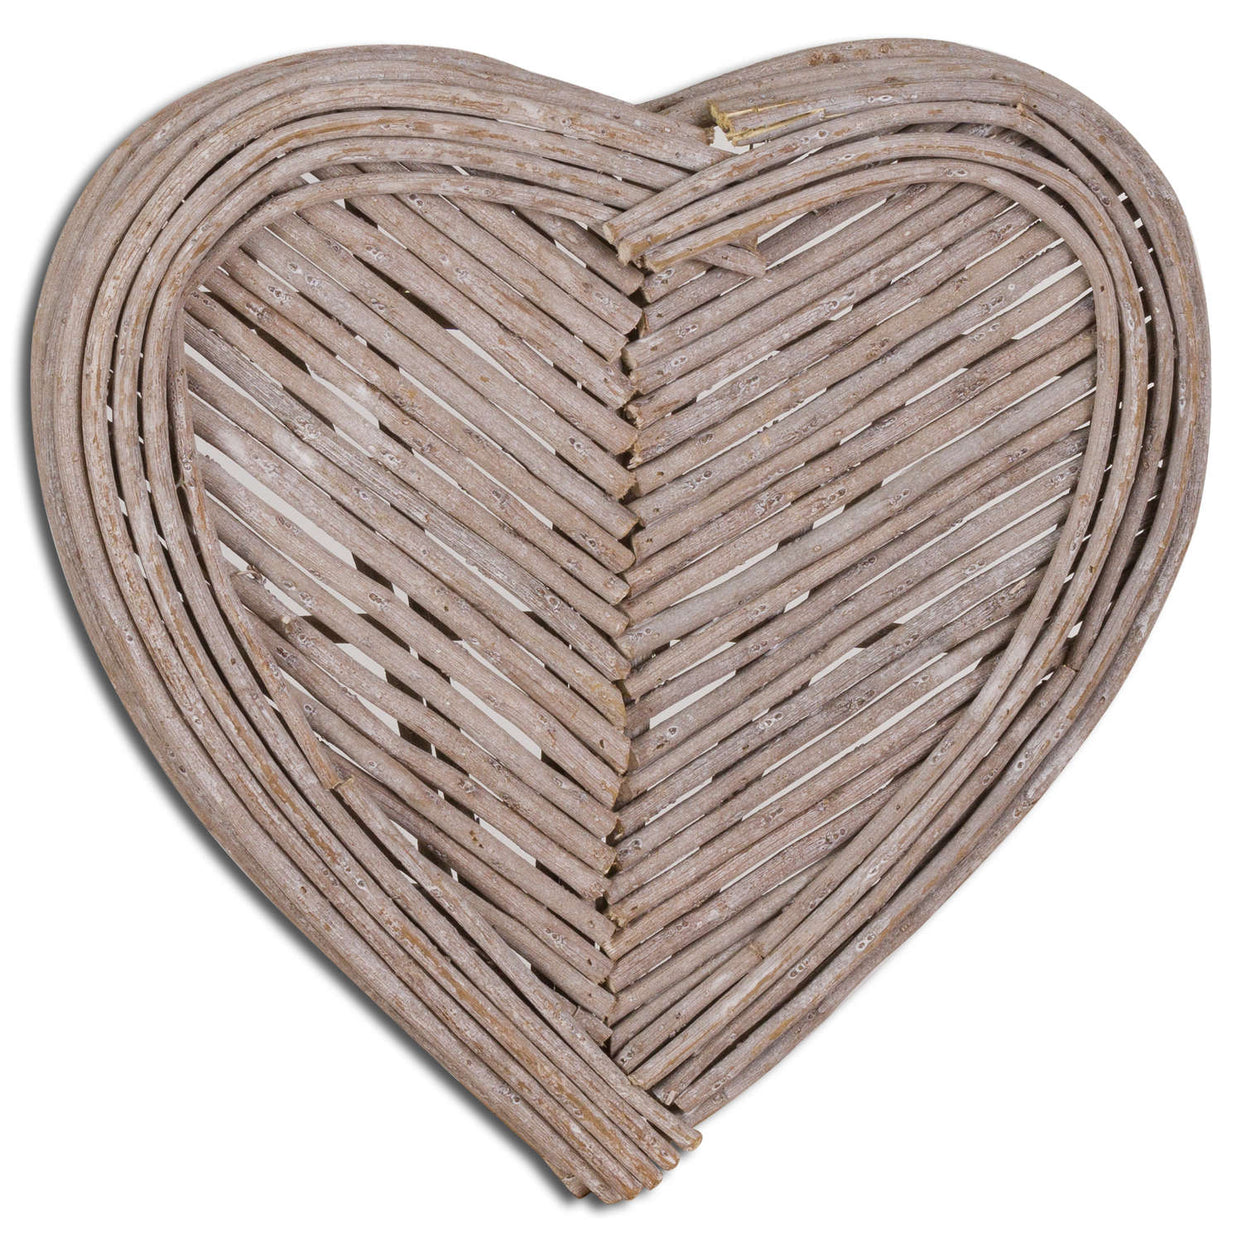 Wooden Small Heart Wicker Wall Art 40Cm For Hill Interiors - HIL-20065